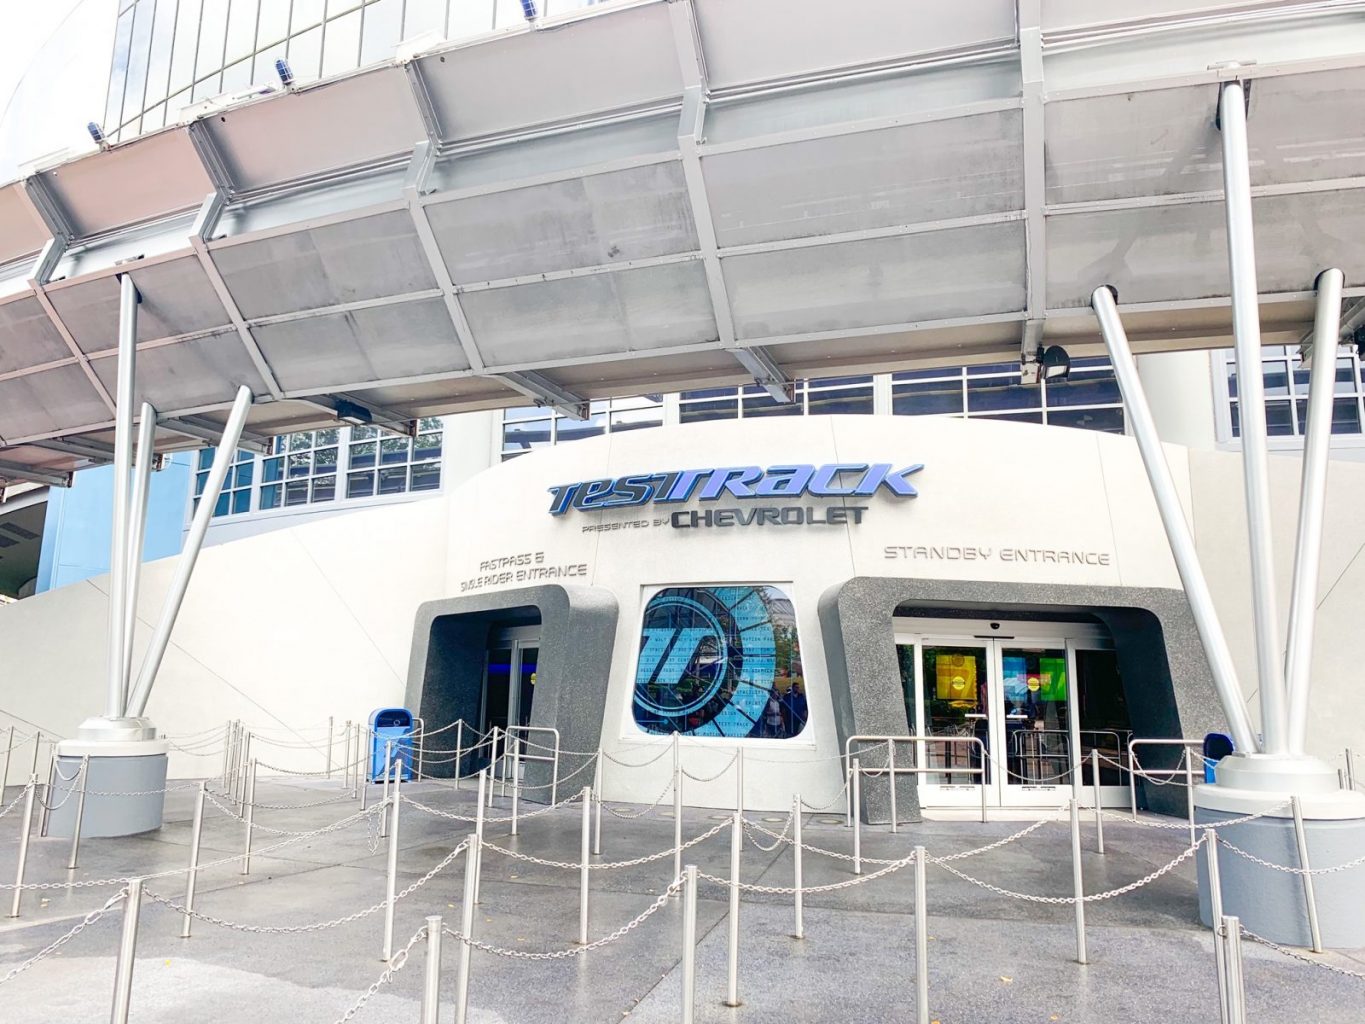 Things To Do In Disney World Test Track